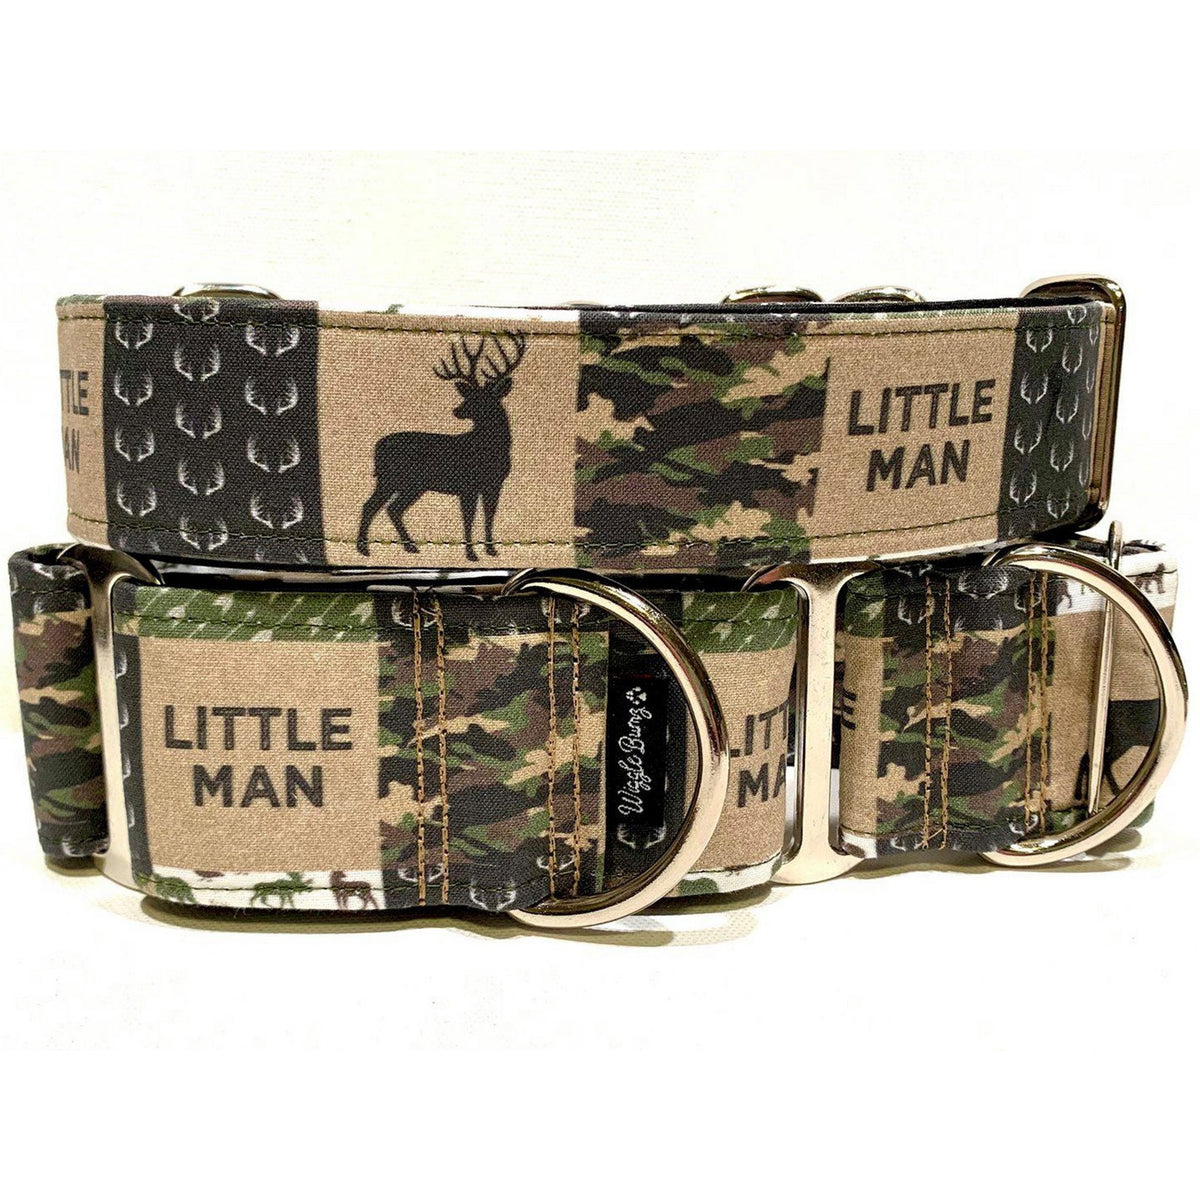 Little Man Camo Dog Collar by Big Paw Shop featuring a whimsical design on cotton fabric